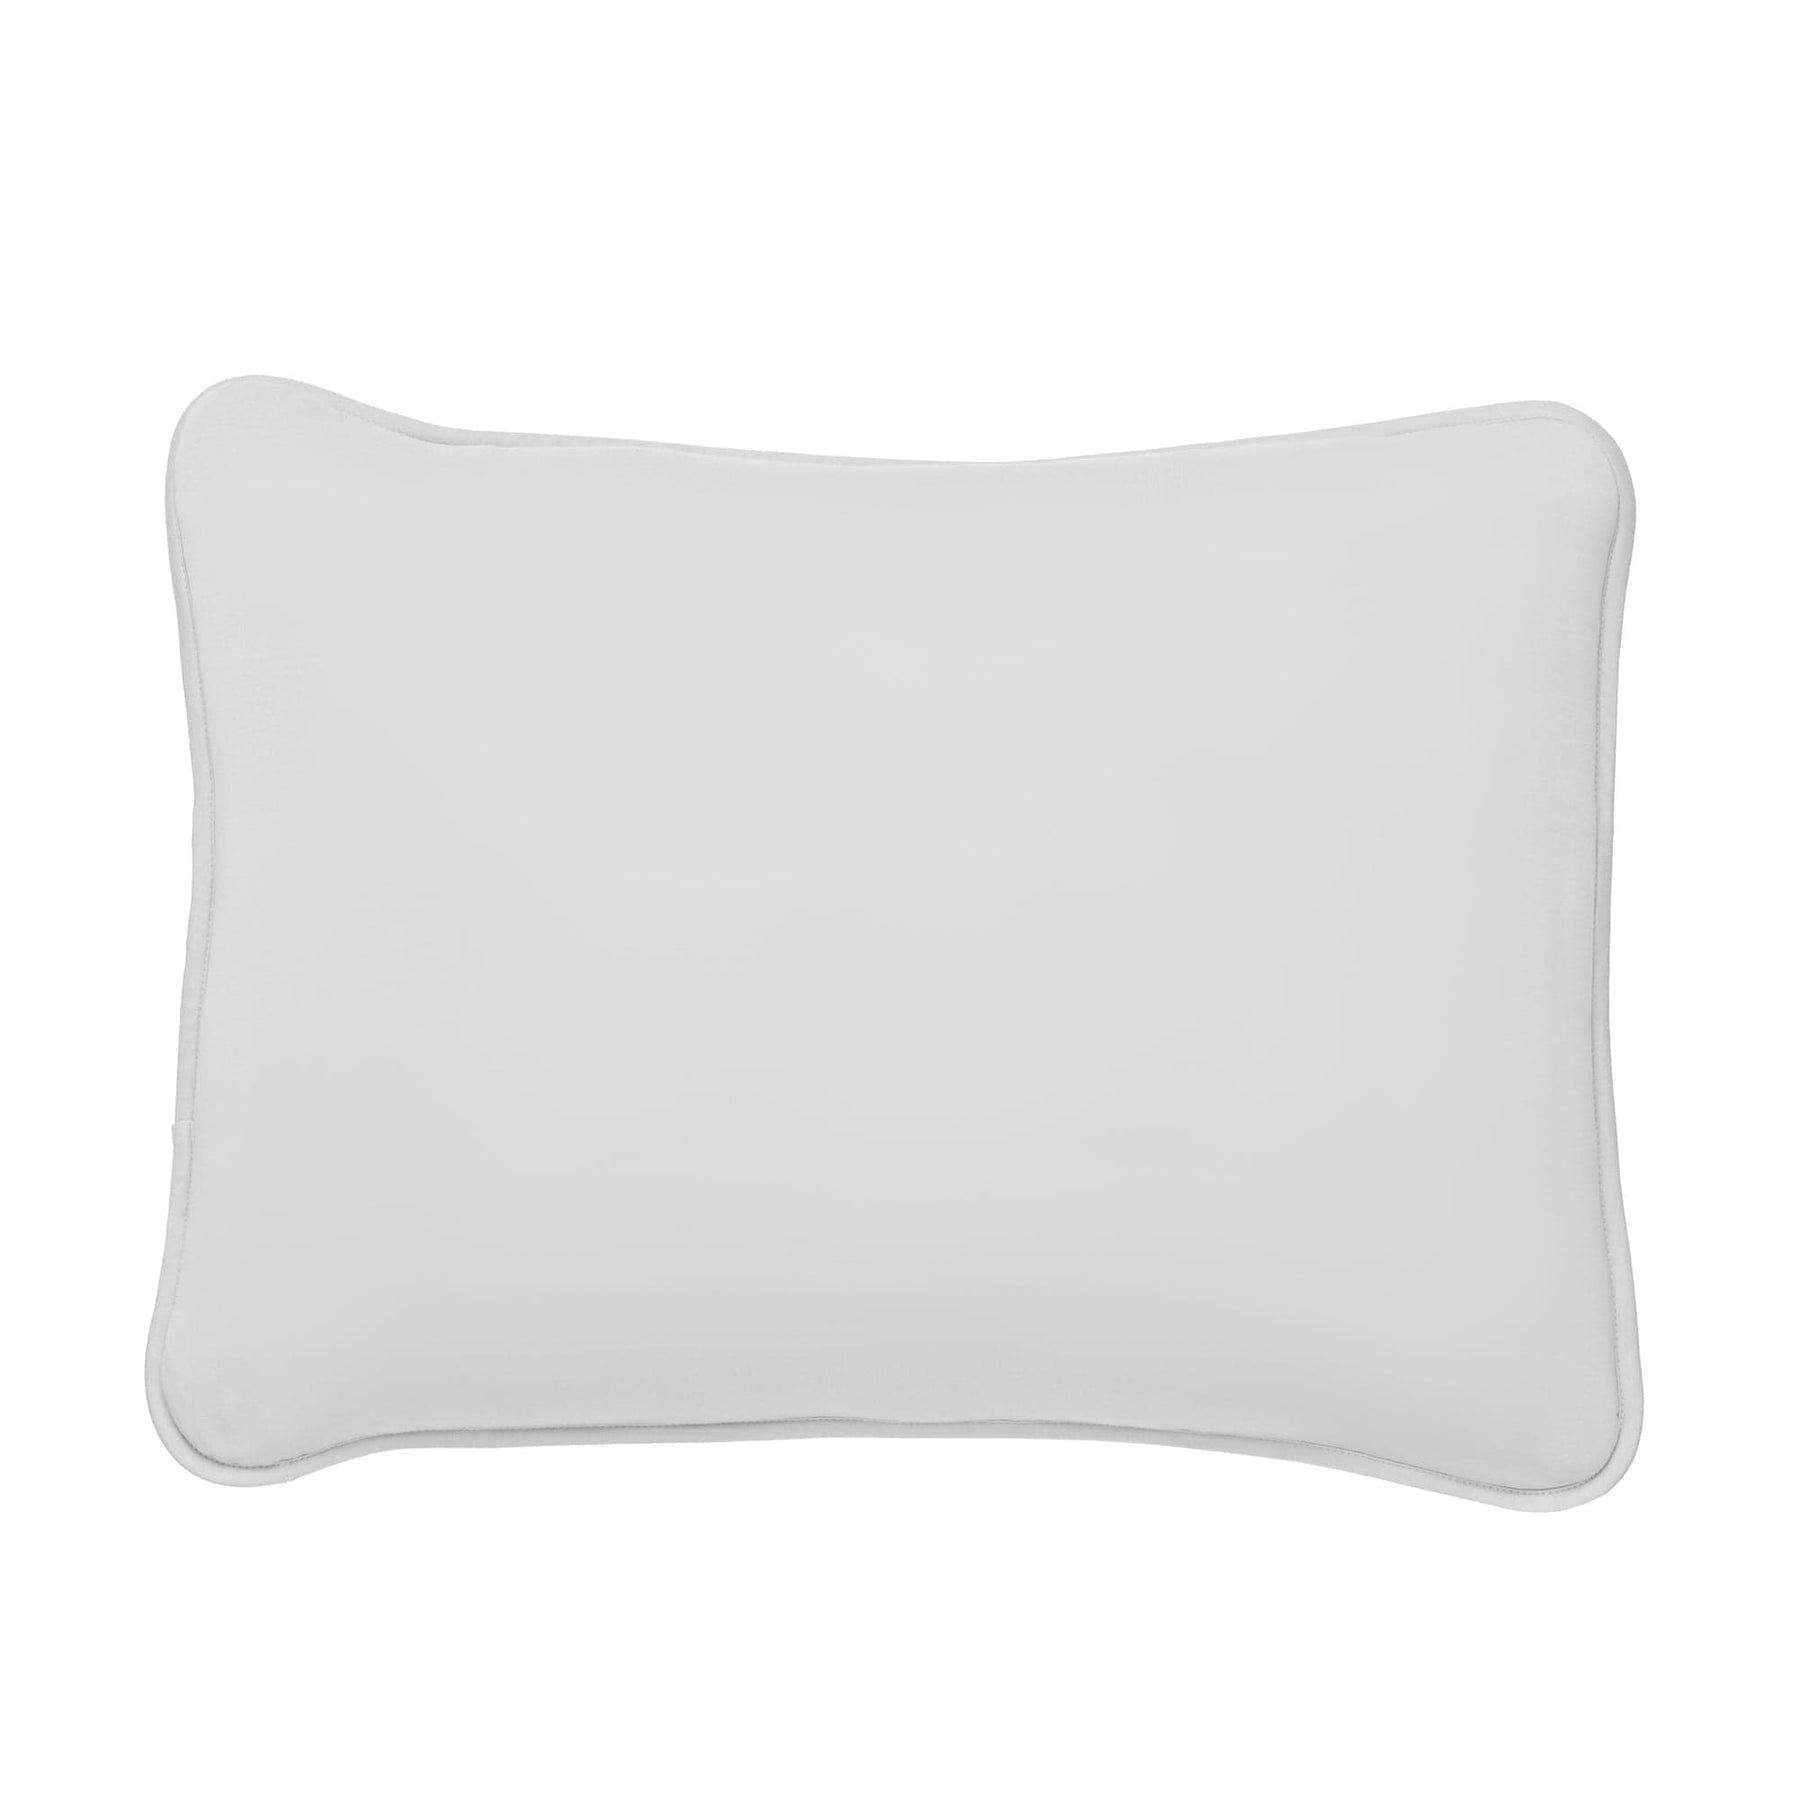 Kyte Baby Standard Quilted Pillow Case Storm / Standard Quilted Standard Quilted Pillowcase in Storm